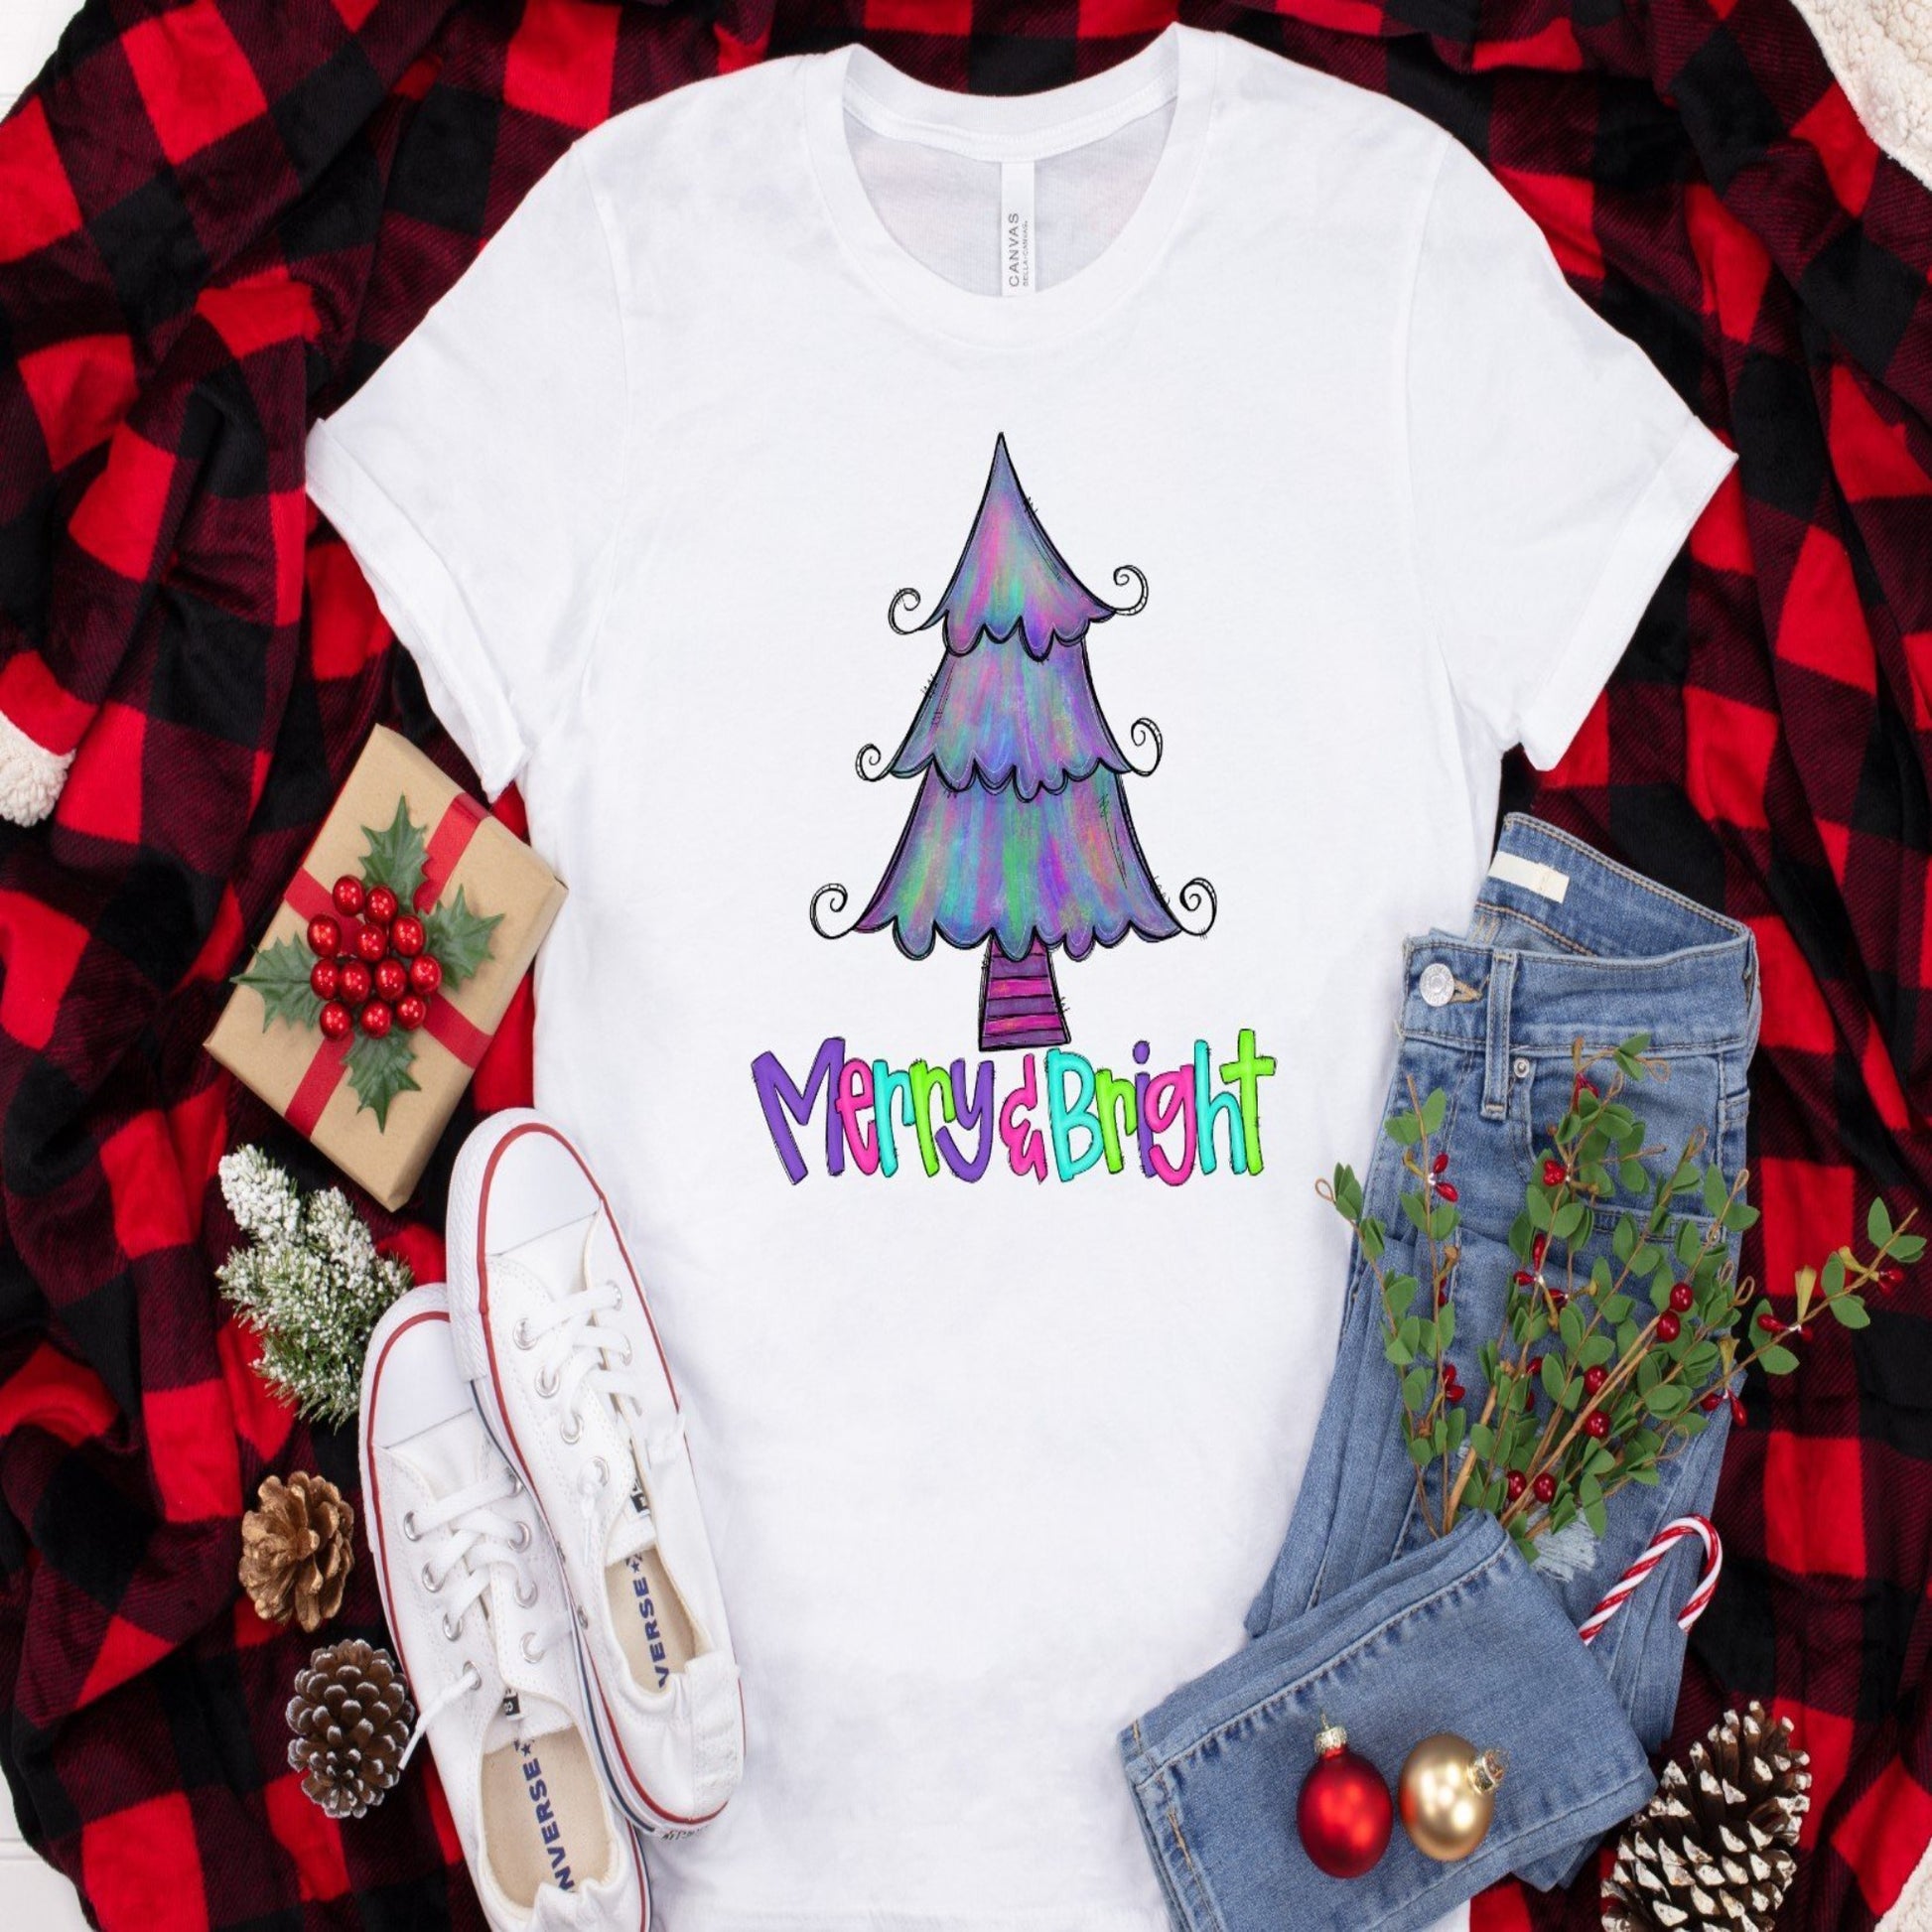 merry_and_bright with christmas tree specialty tee christmas shirt holiday wear casual tshirt 